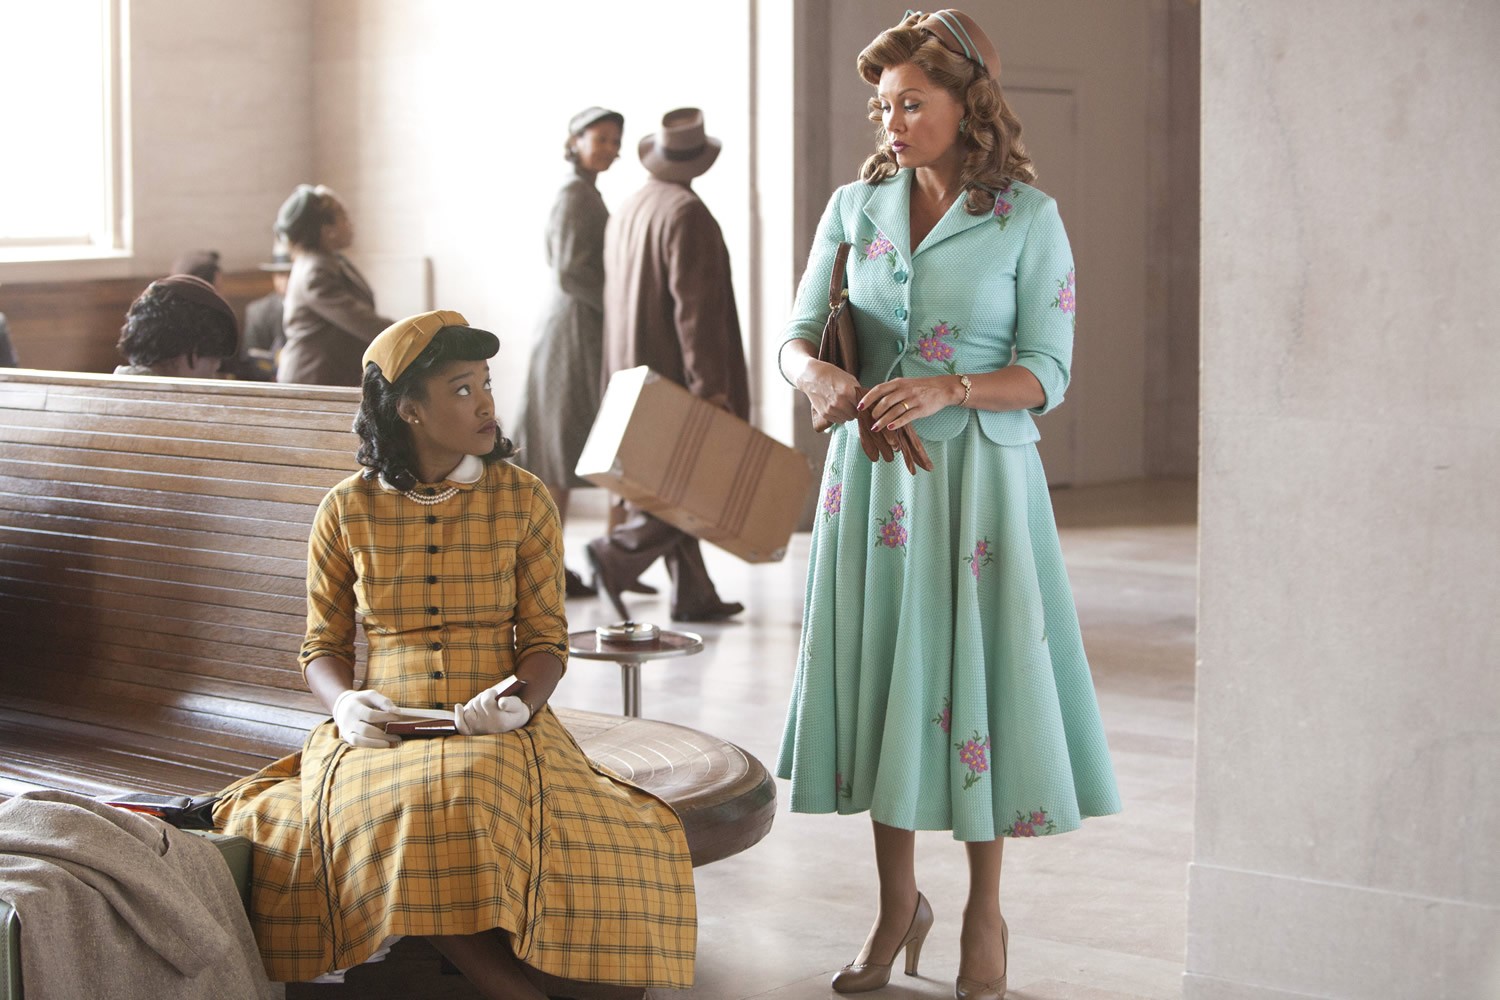 Keke Palmer stars as Thelma and Vanessa Williams stars as Jessie Mae Watts in Lifetime's The Trip to Bountiful (2014). Photo credit by Annette Brown.